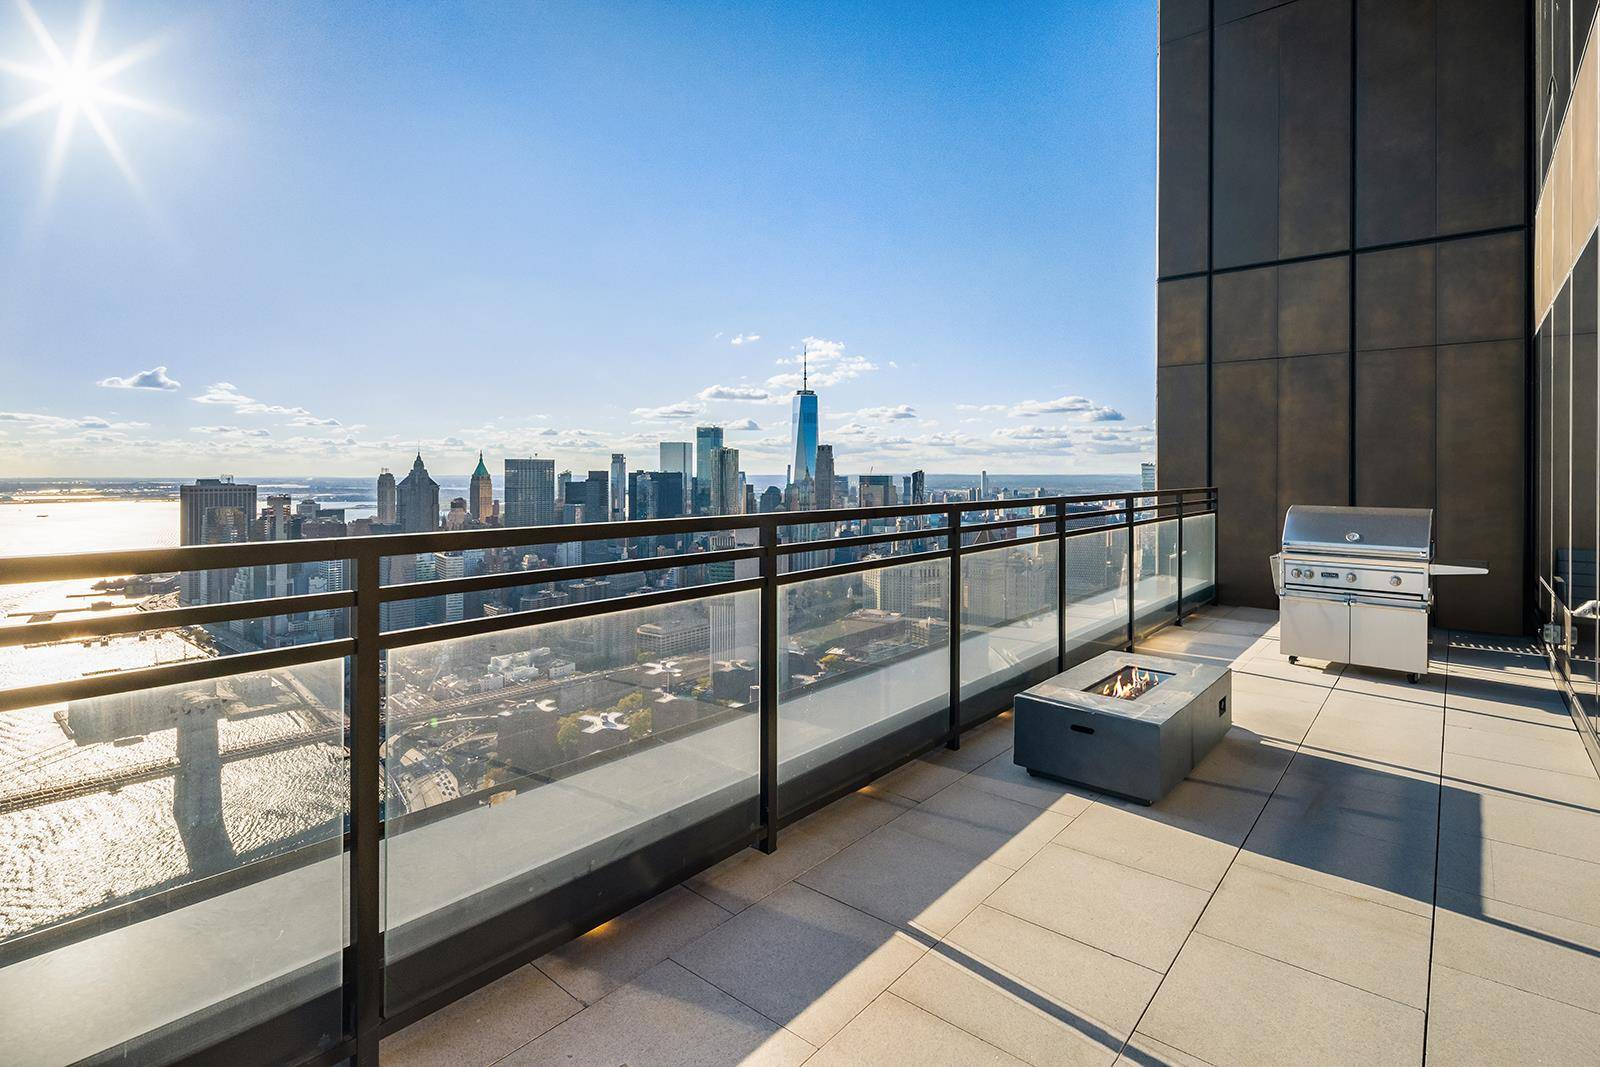 Penthouse 80C is a furnished duplex home in the sky with an expansive south facing entertaining terrace and gracious gallery entry.